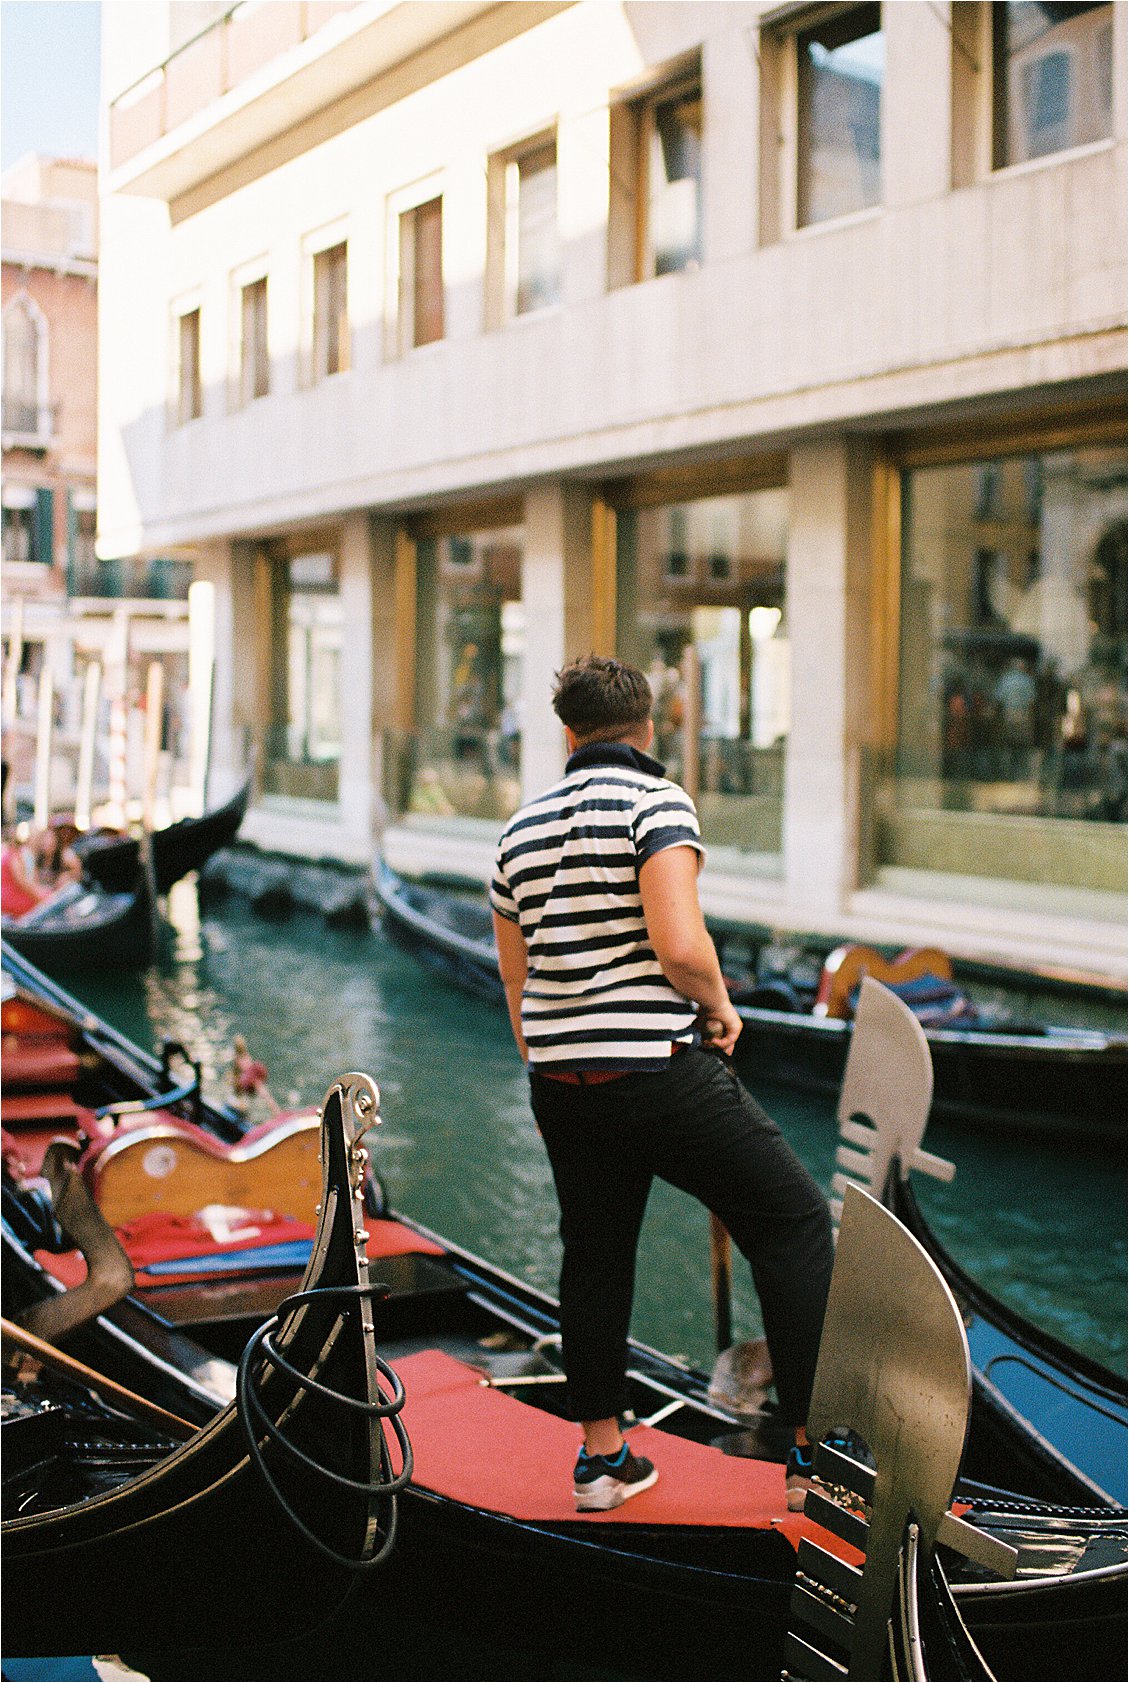 Gondelier in Venice, Italy on film by destination wedding photographer Renee Hollingshead